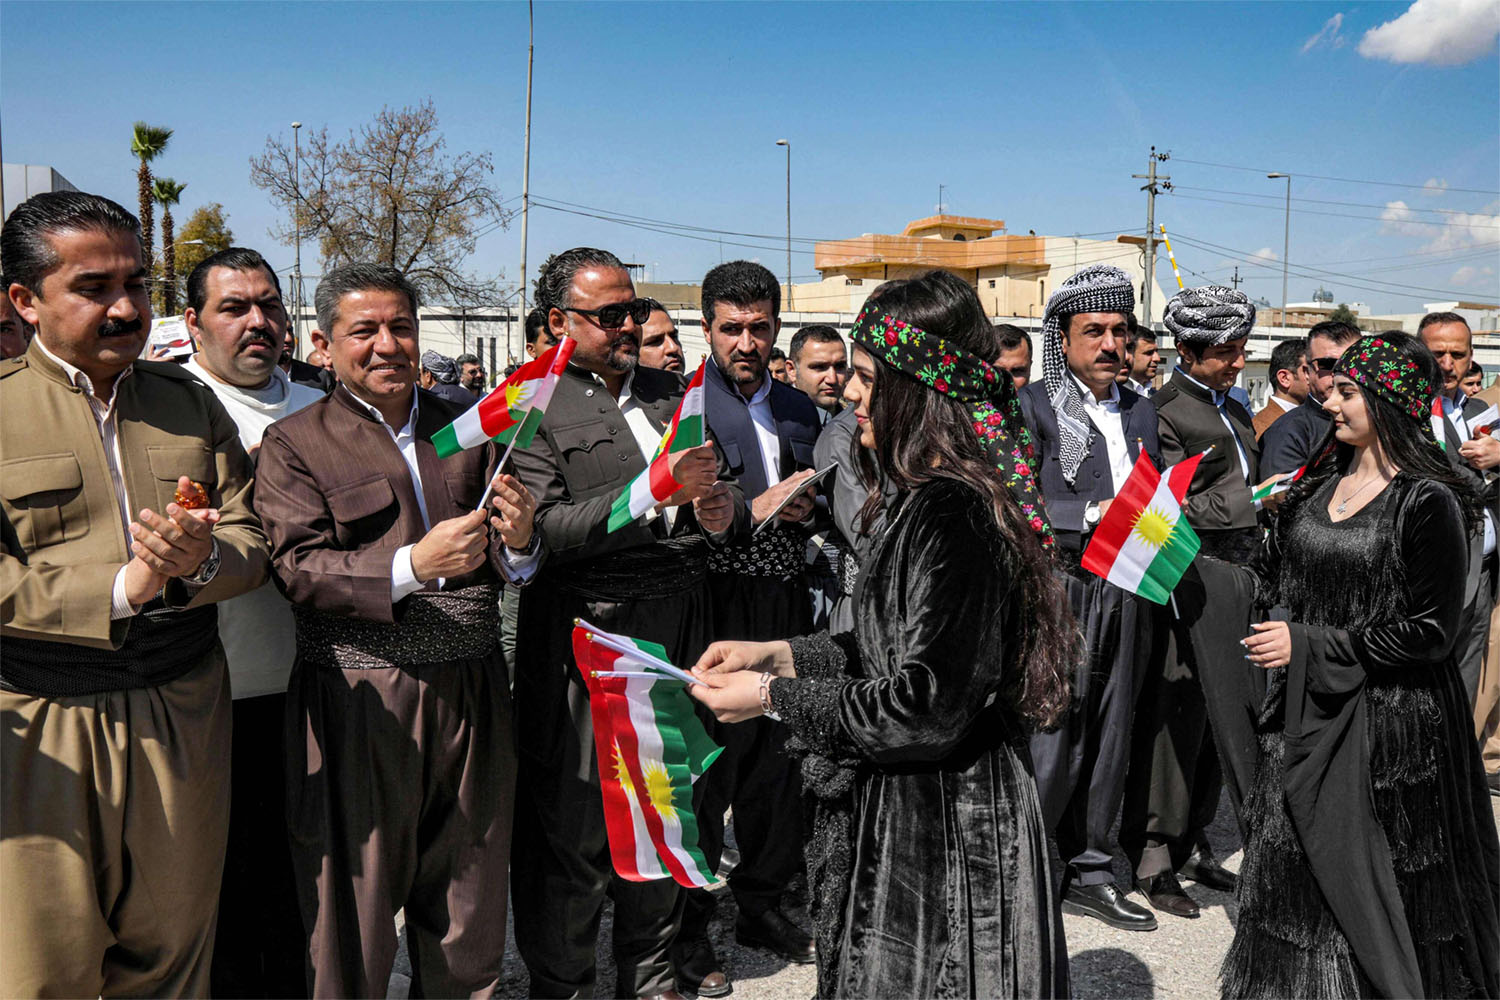 Corruption in the system is really undermining the potential of Iraq's Kurdistan